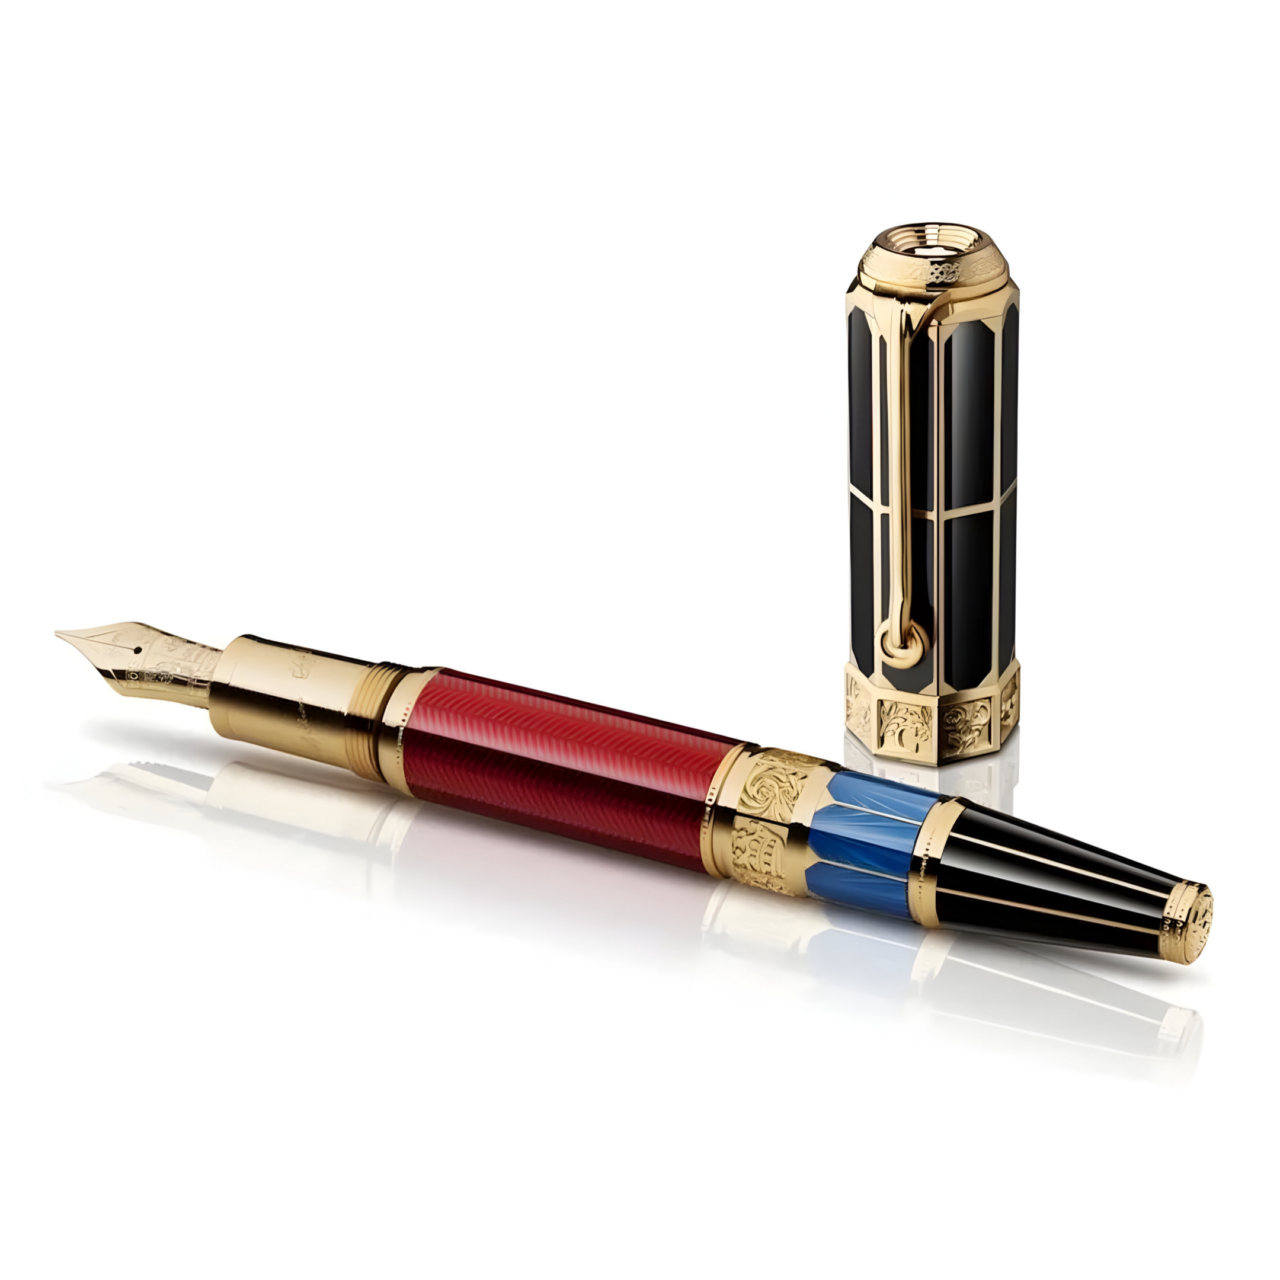 Montblanc 2016 Writers Edition William Shakespeare 1597 Limited Edition Fountain Pen